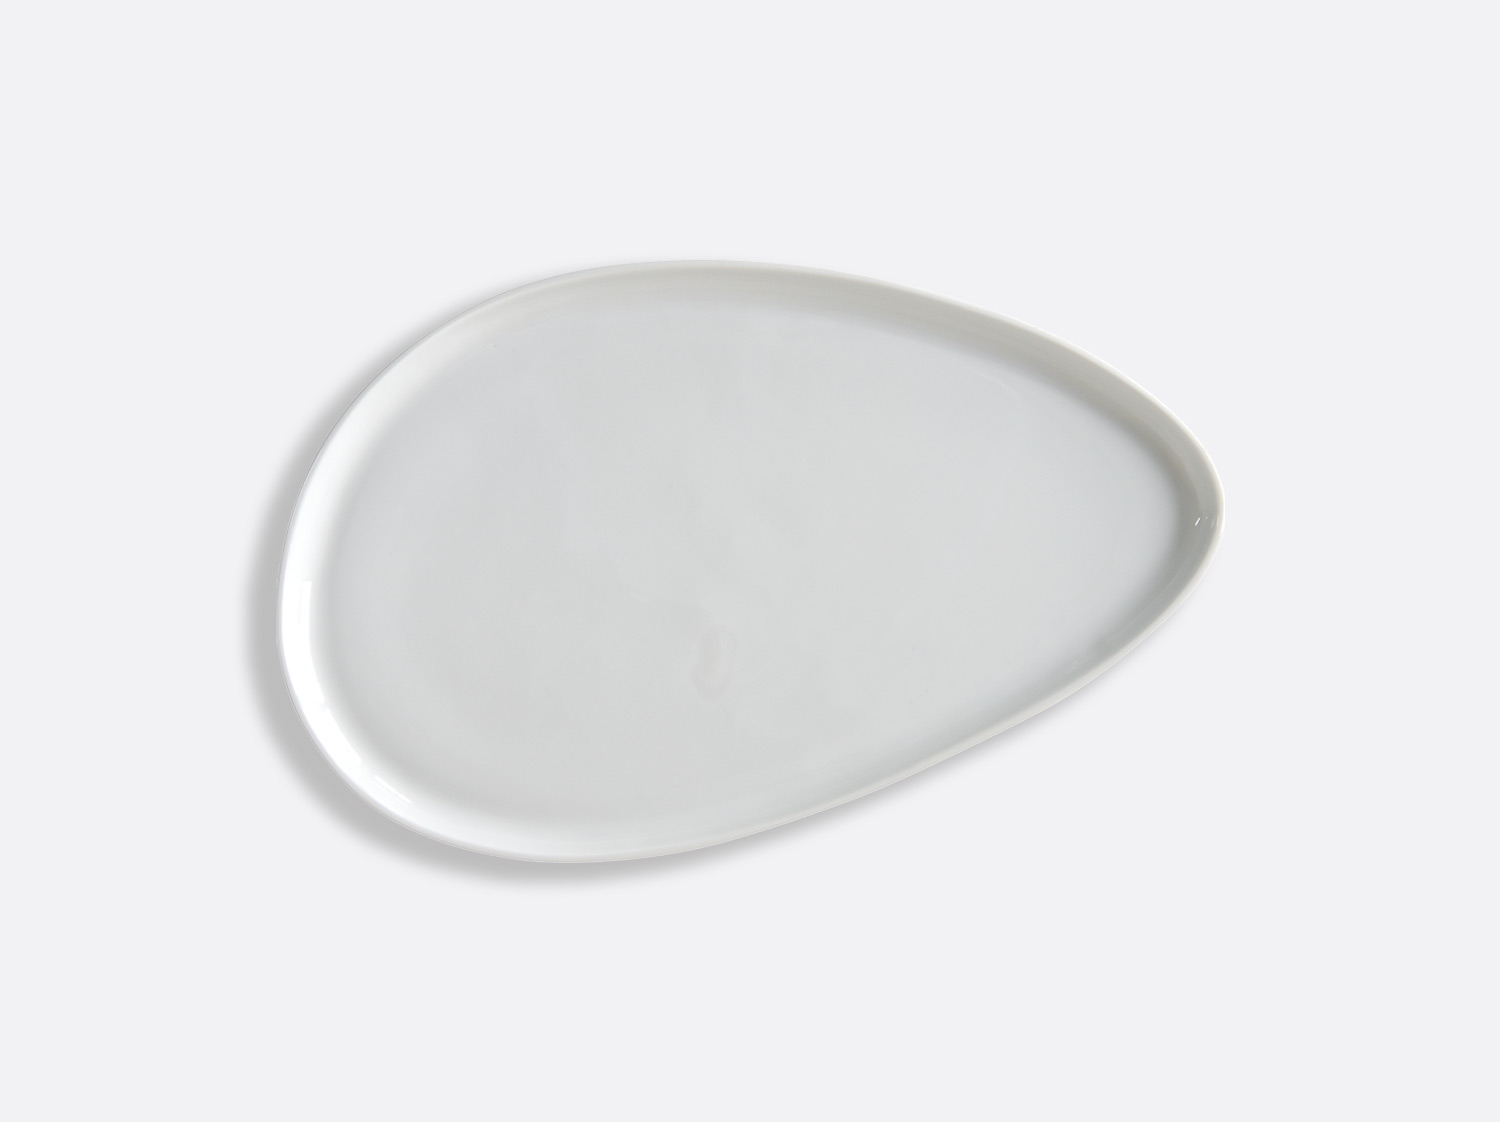 China Platter S2 white of the collection Ombres - Sarah-Linda Forrer | Bernardaud